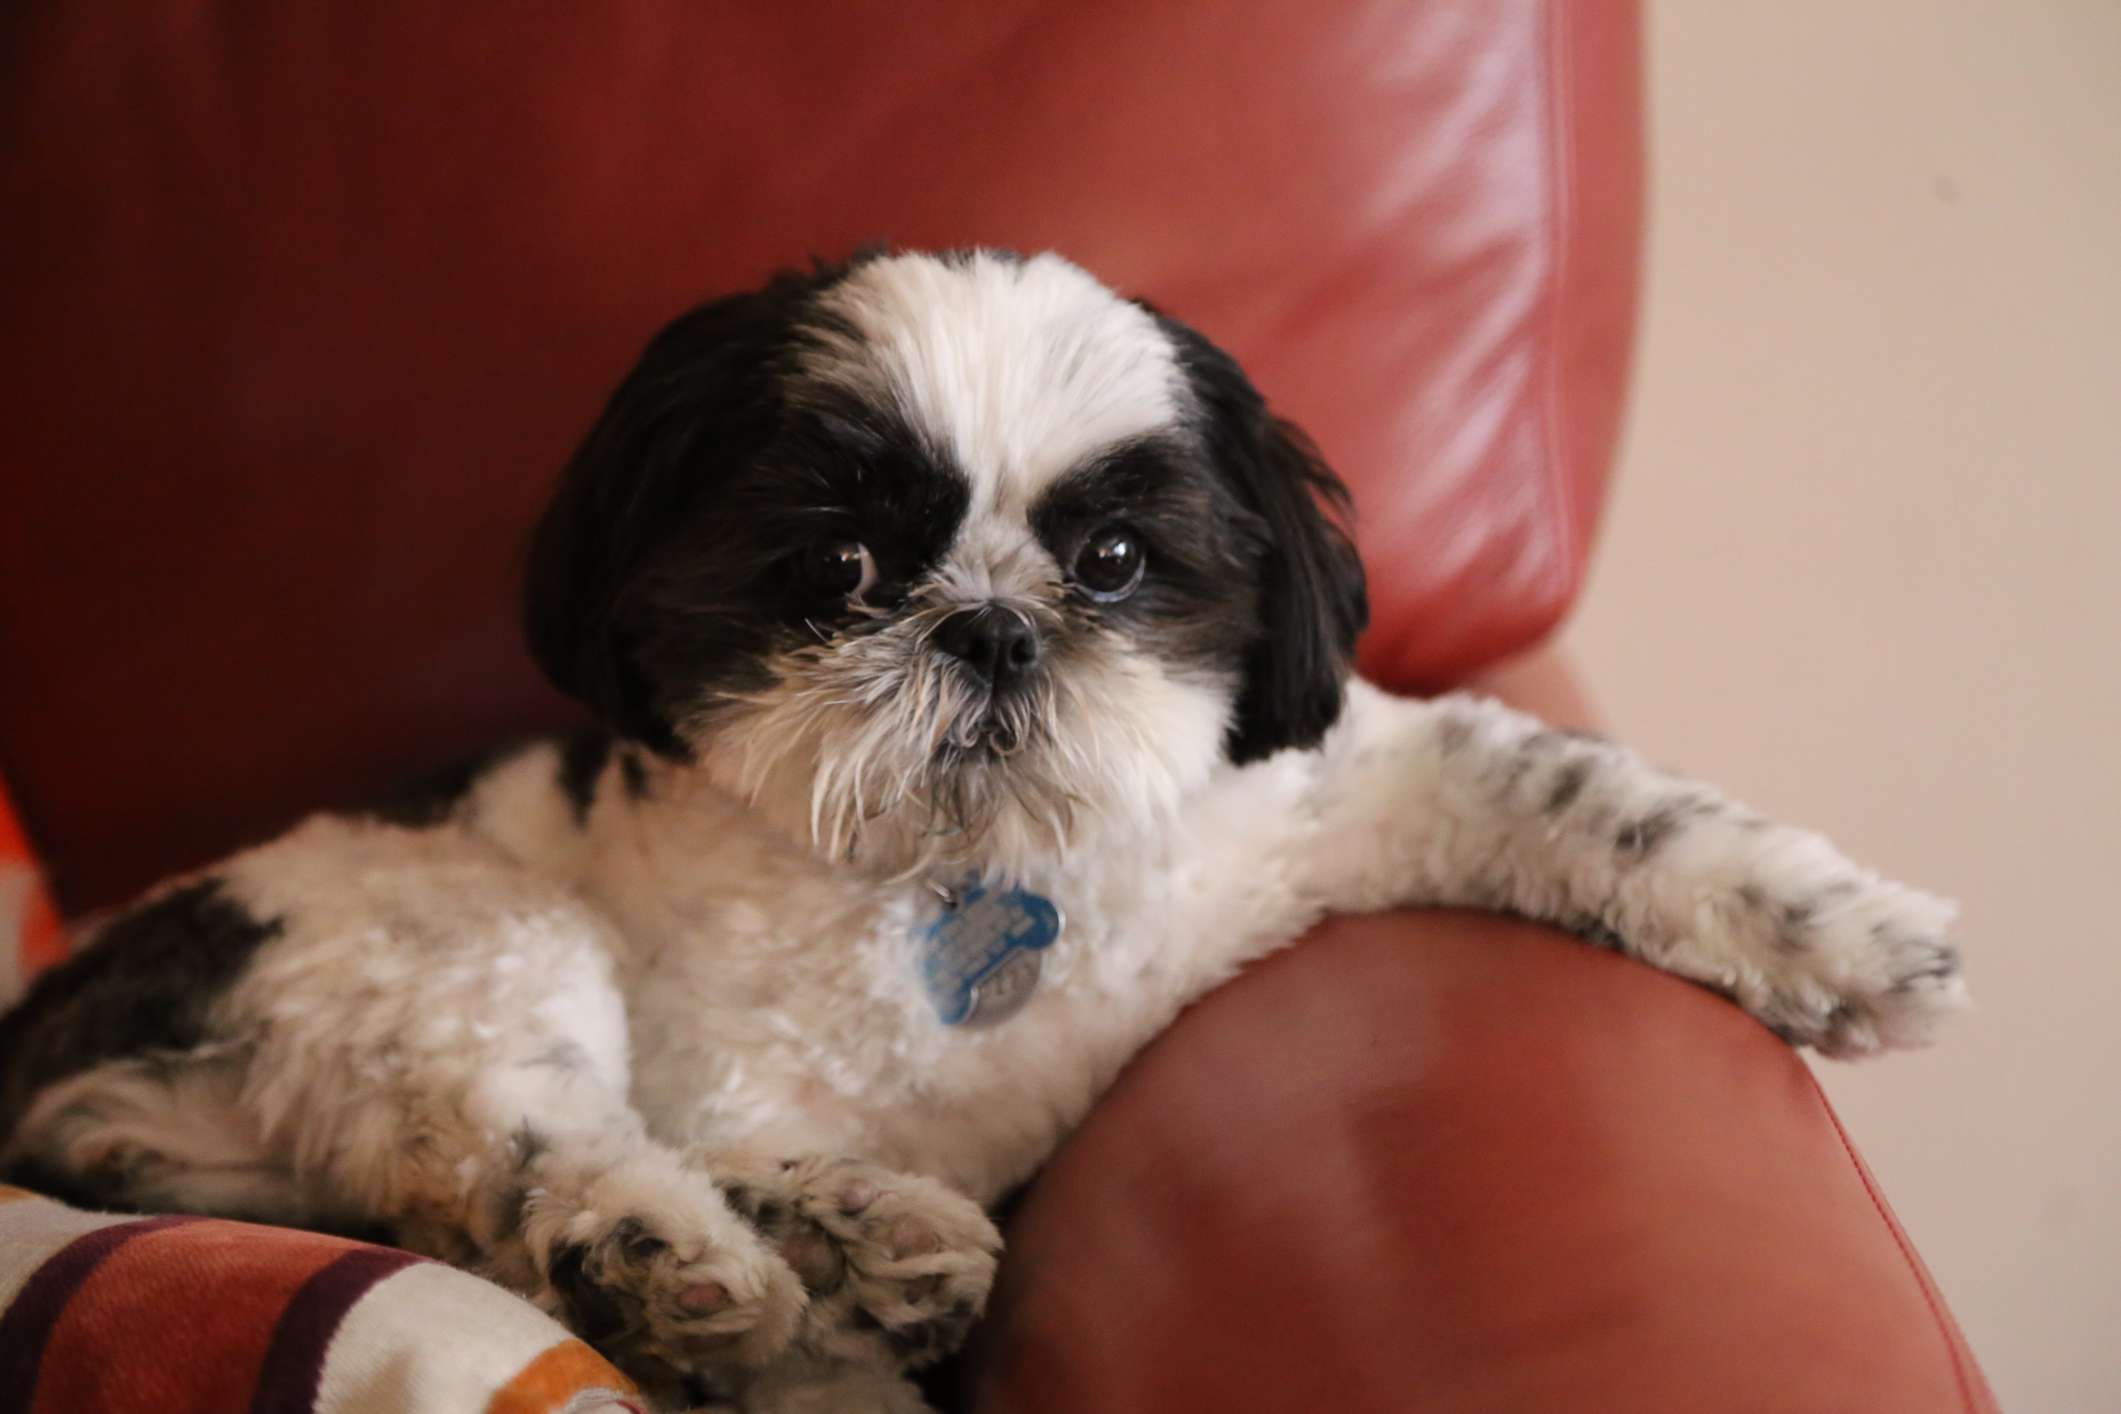 Black and white Shih Tzu dog sitting on edge of leather couch.